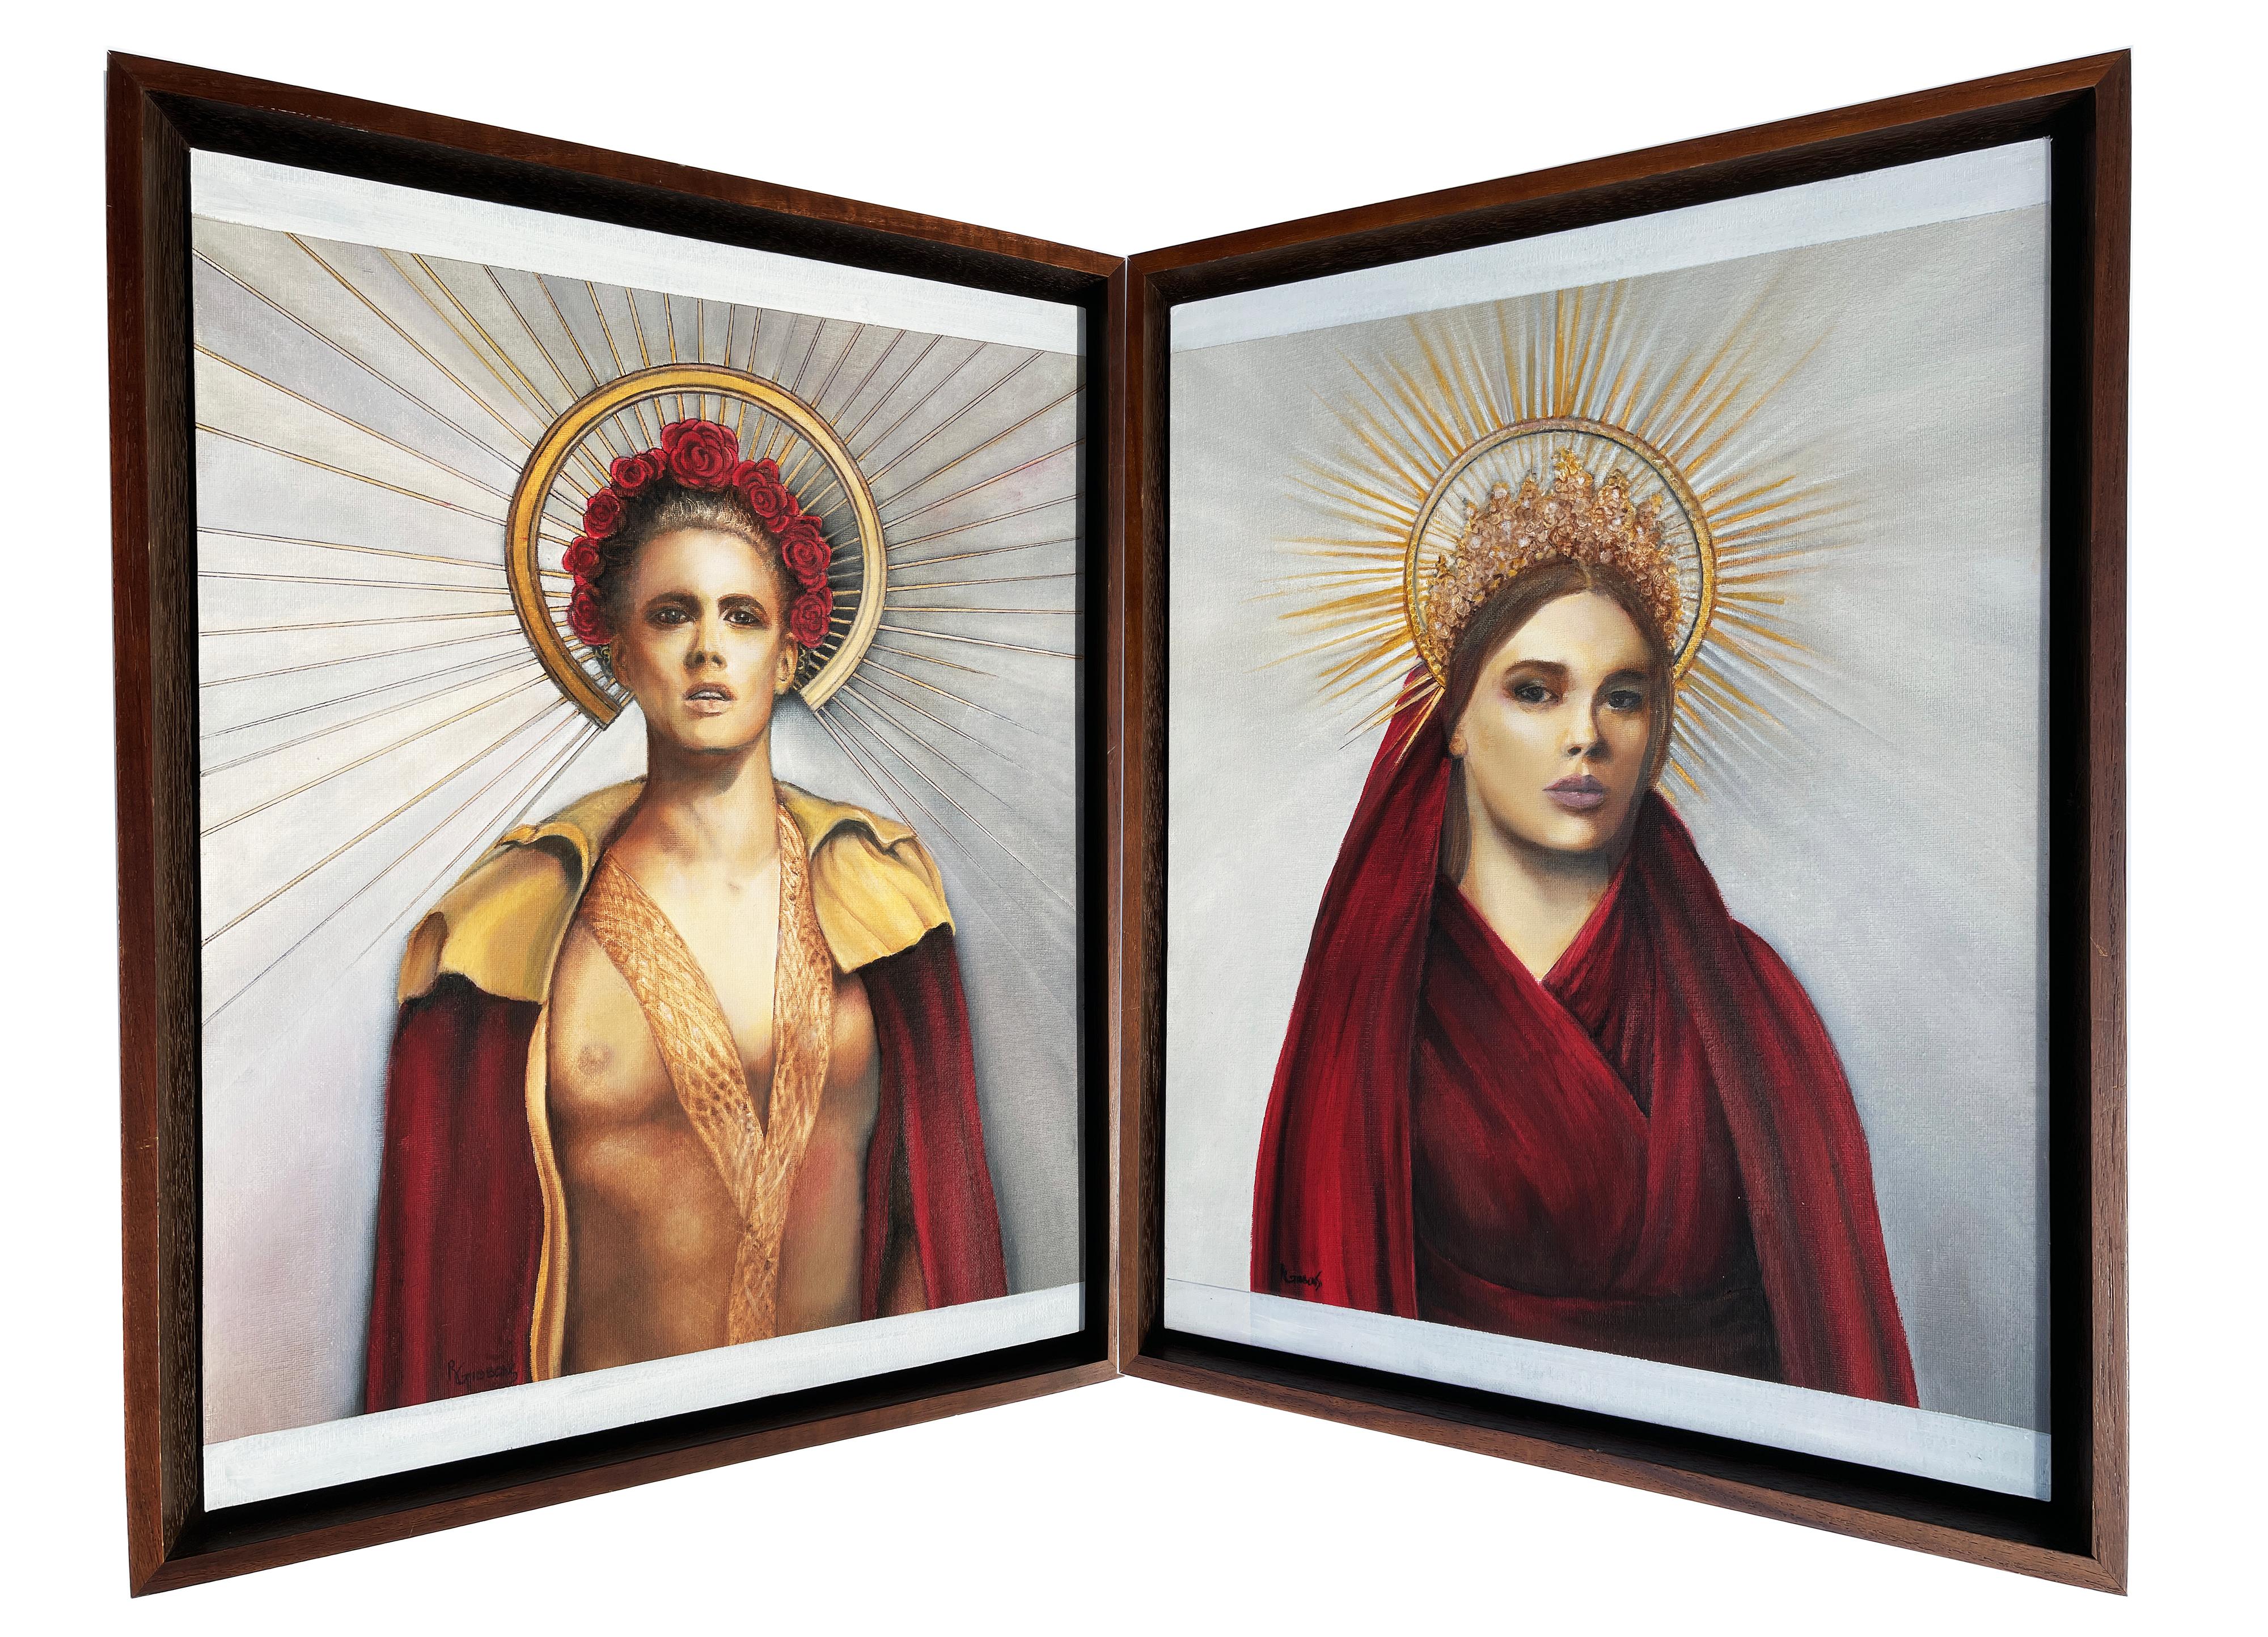 Richard Gibbons Figurative Painting - Jason and Medea - Greek Mythological Couple Inspired Diptych of Love and Tragedy